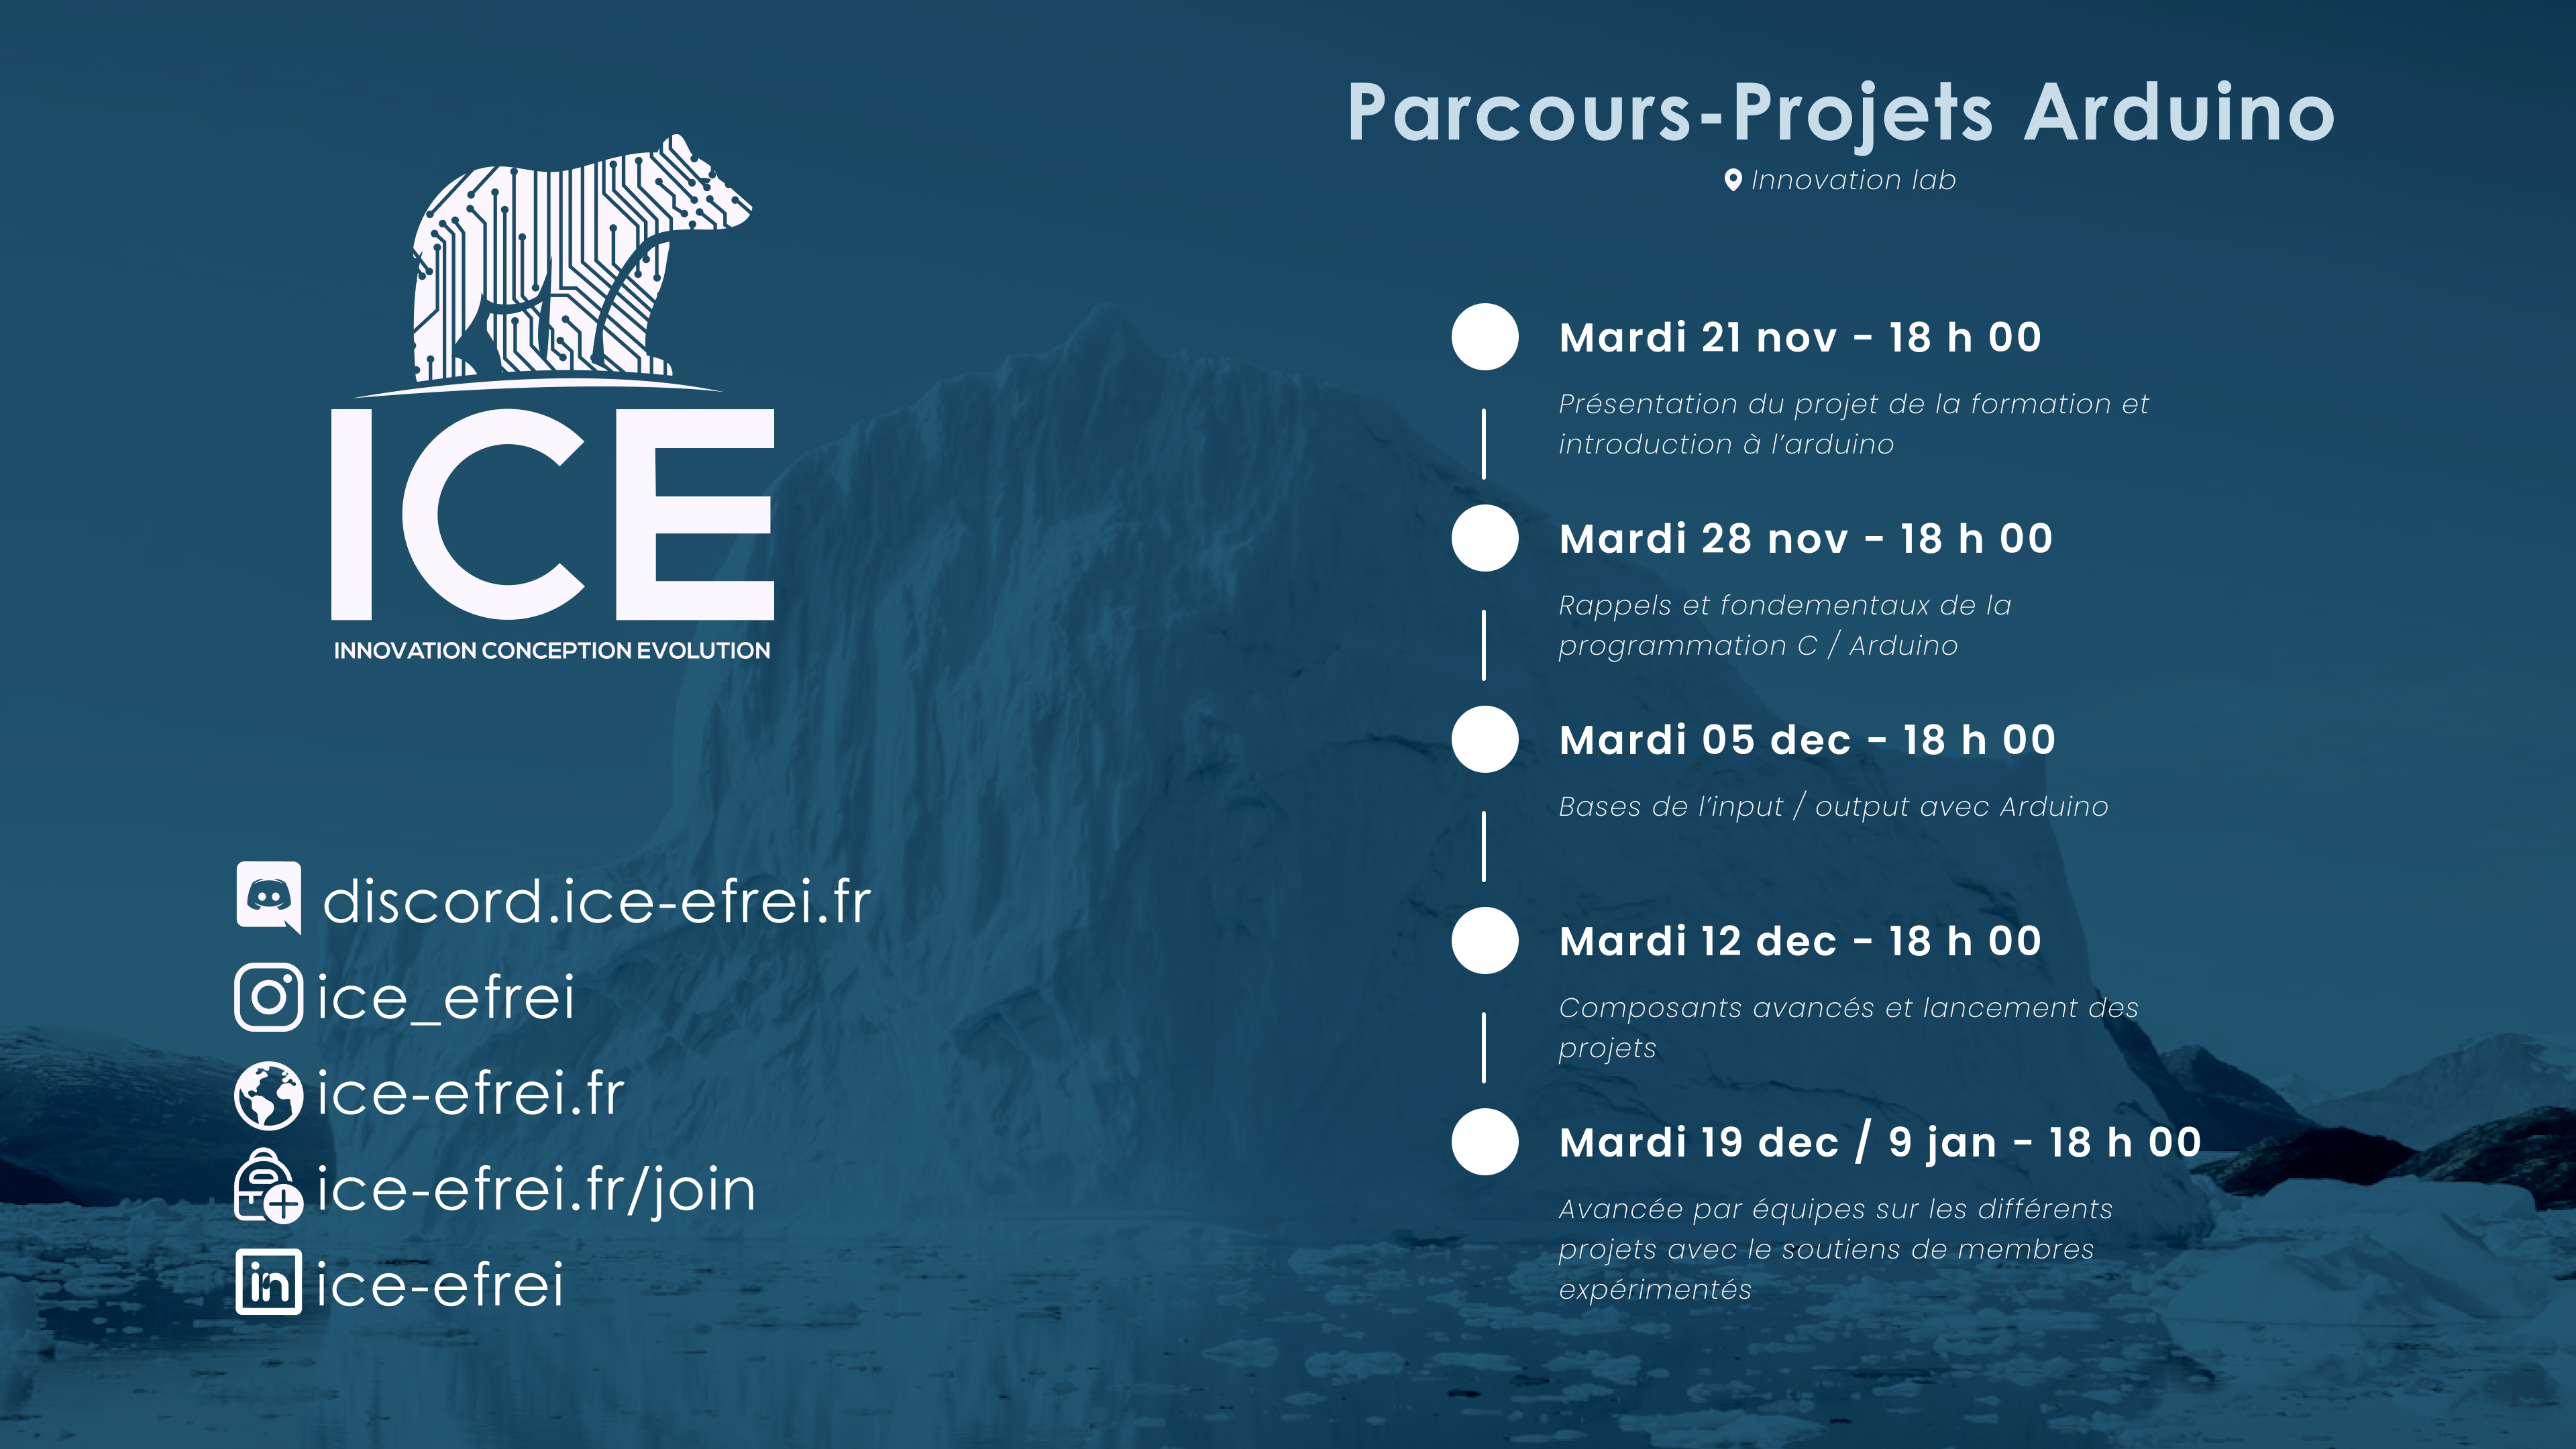 https://raw.githubusercontent.com/zhou-efr/CDN/main/ICE/parcourprojet/icescapebox/2023 nov 15 calendrier parcours projet arduino.png